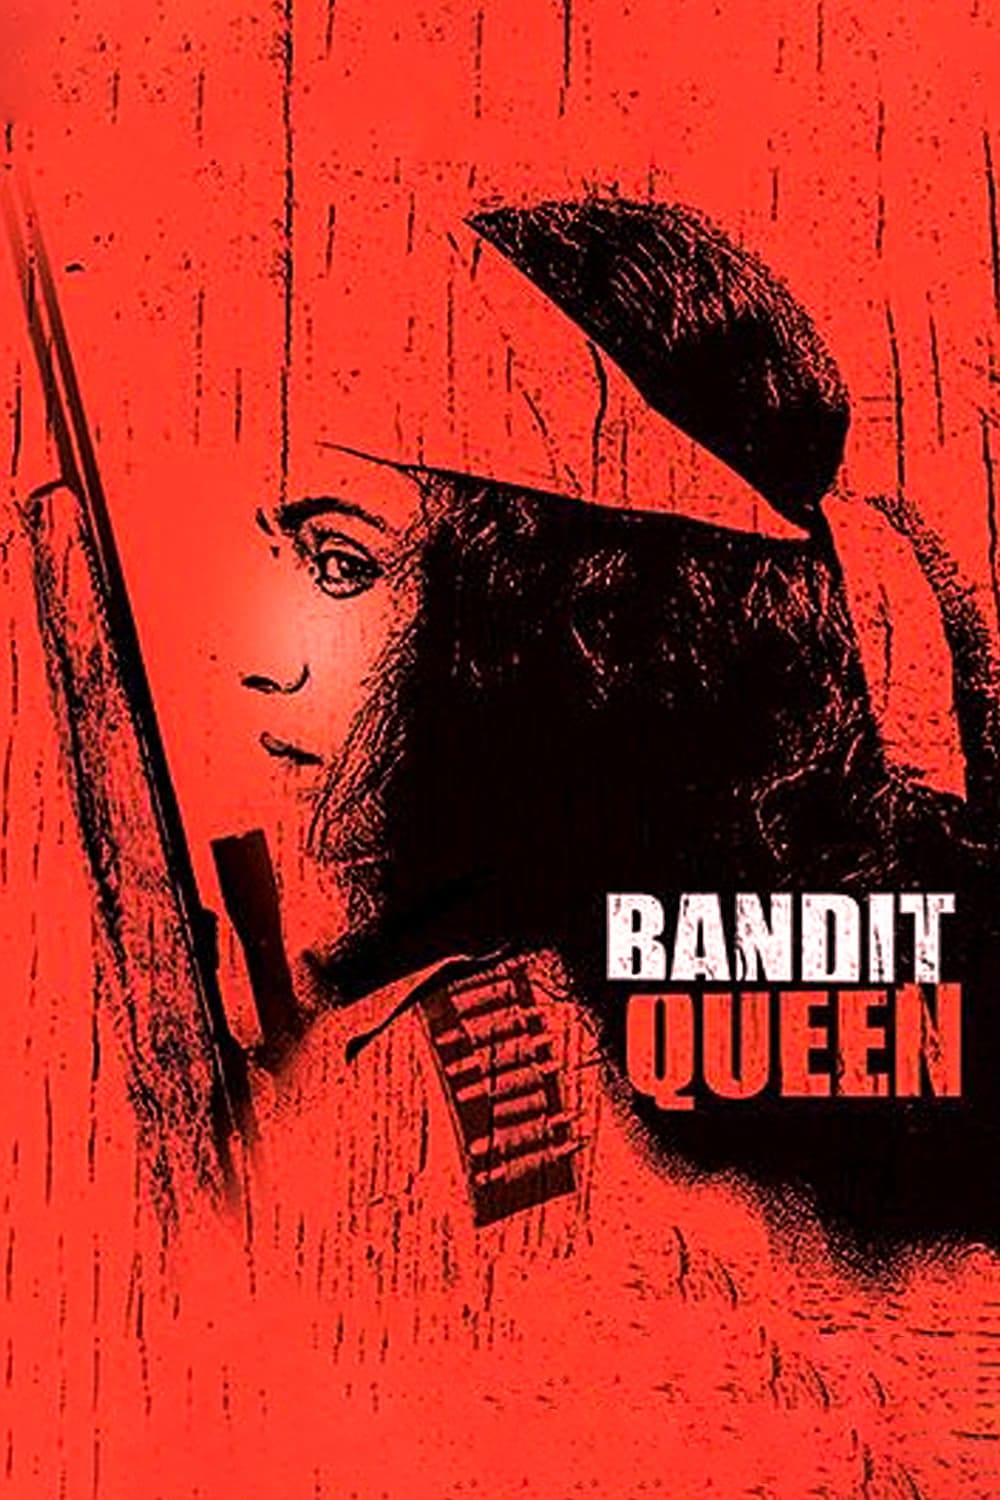 Poster for the movie "Bandit Queen"